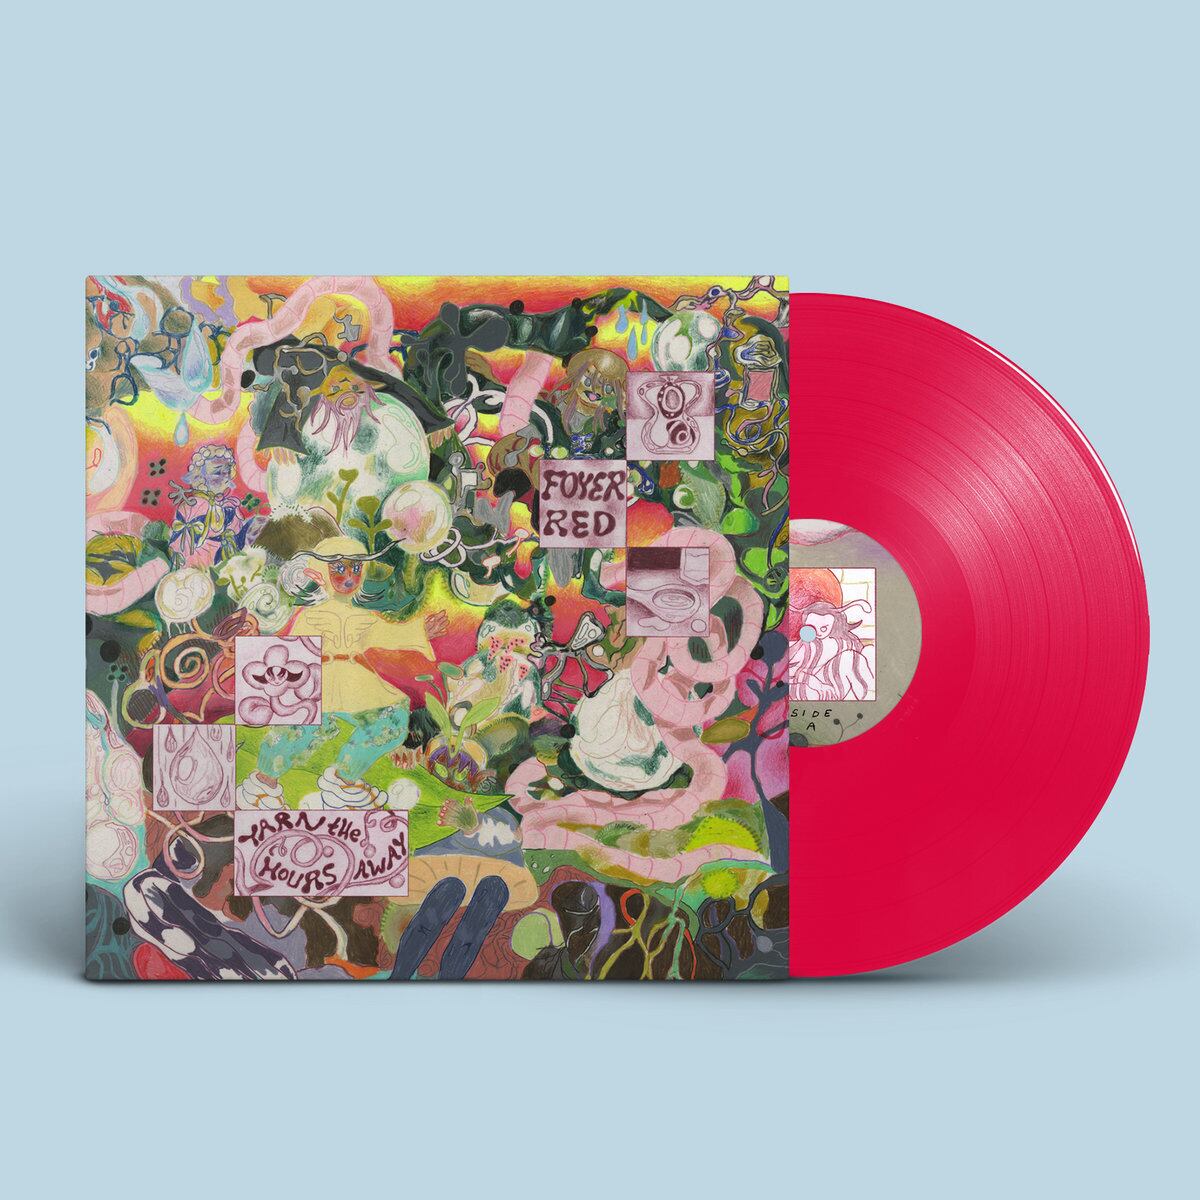 Foyer Red / Yarn the Hours Away（Ltd Red LP）